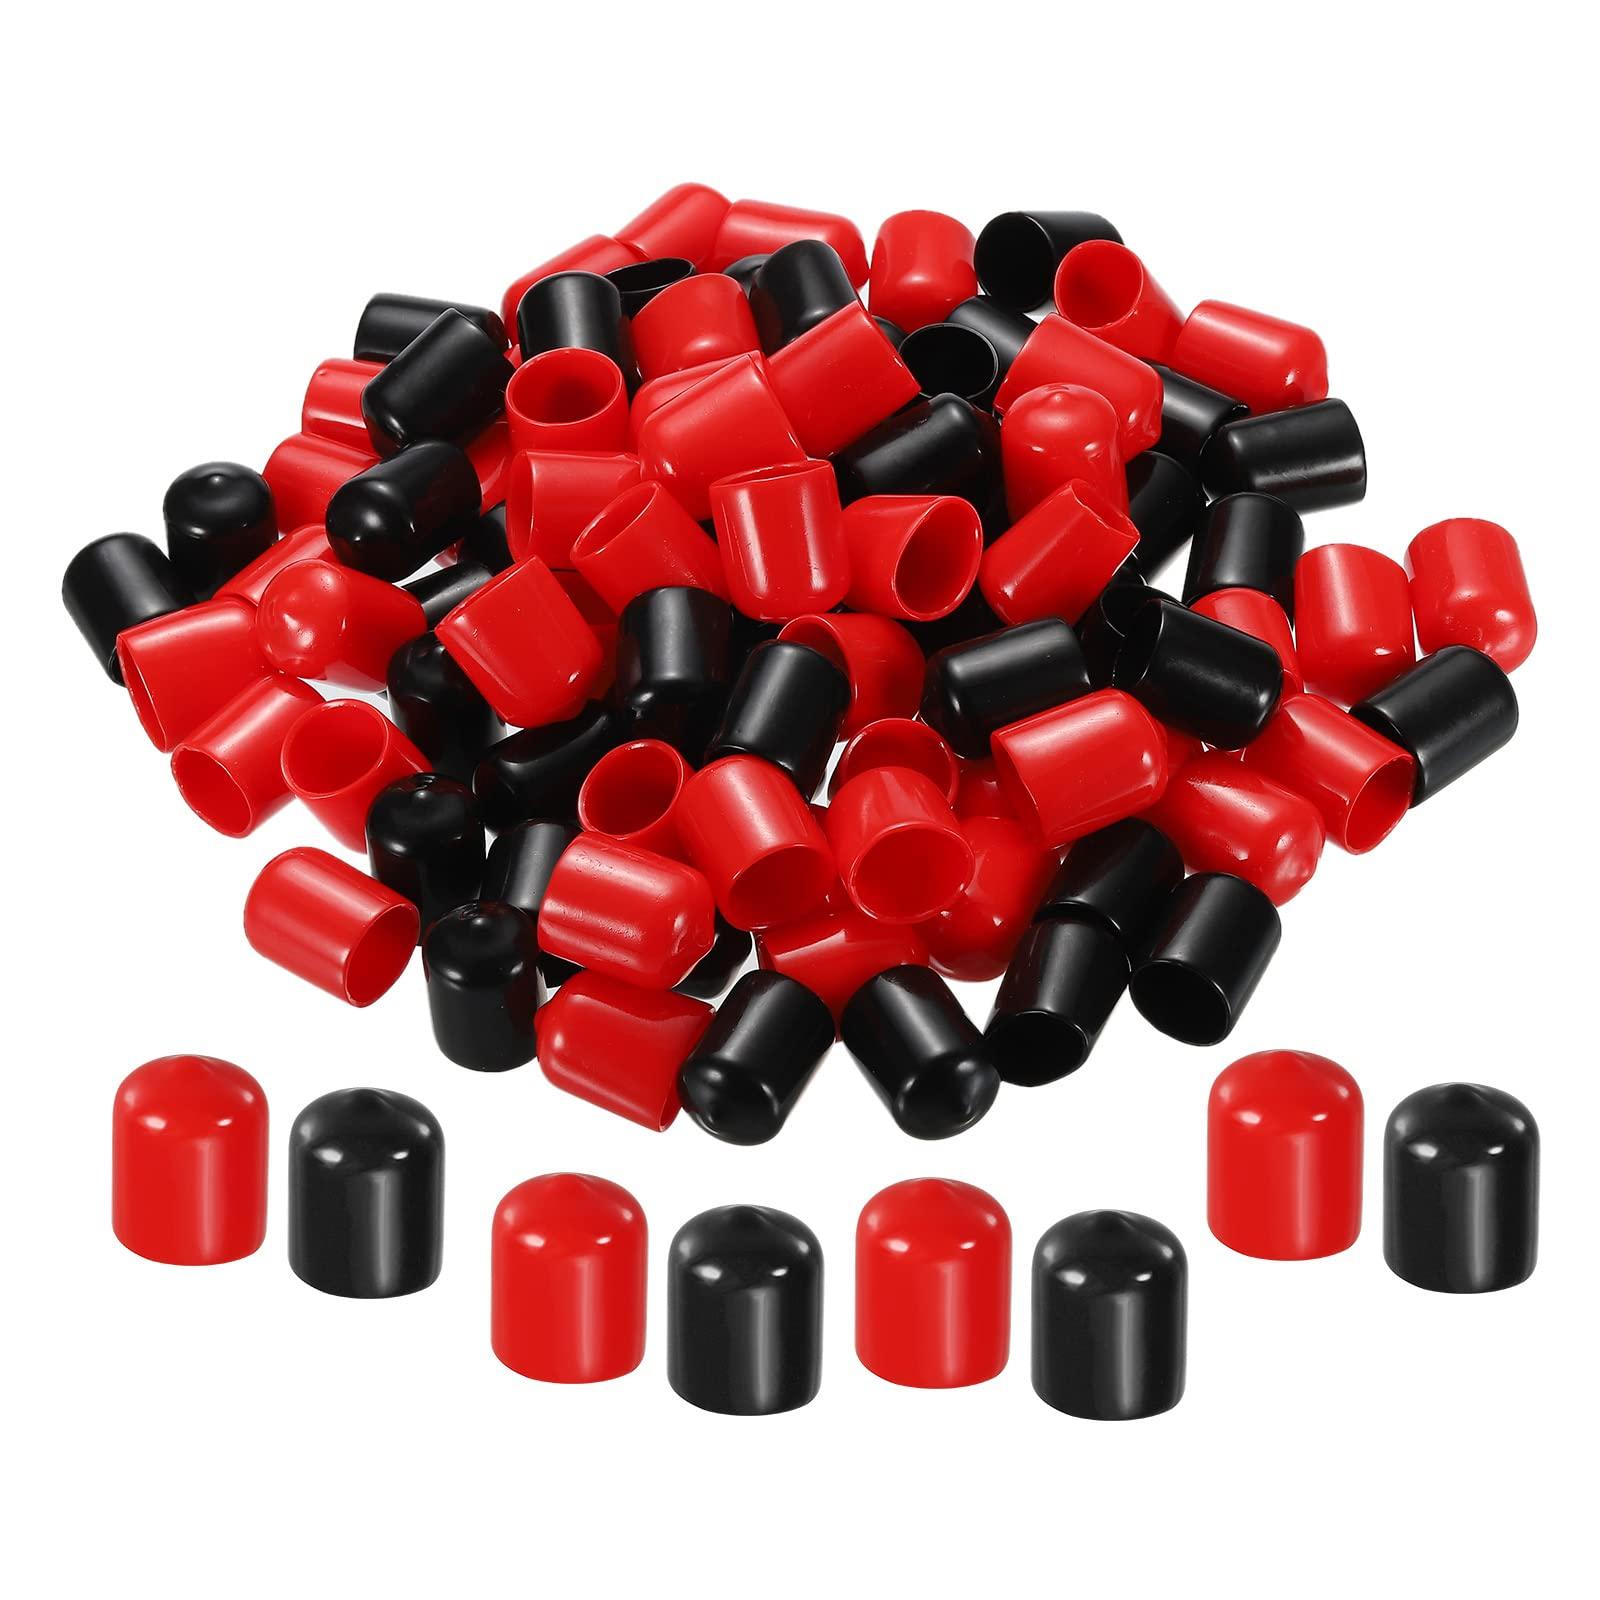 sourcing map 100pcs Rubber End Caps Cover Assortment 15mm PVC Vinyl Screw Thread Protector for Screw Bolt Black Red 0